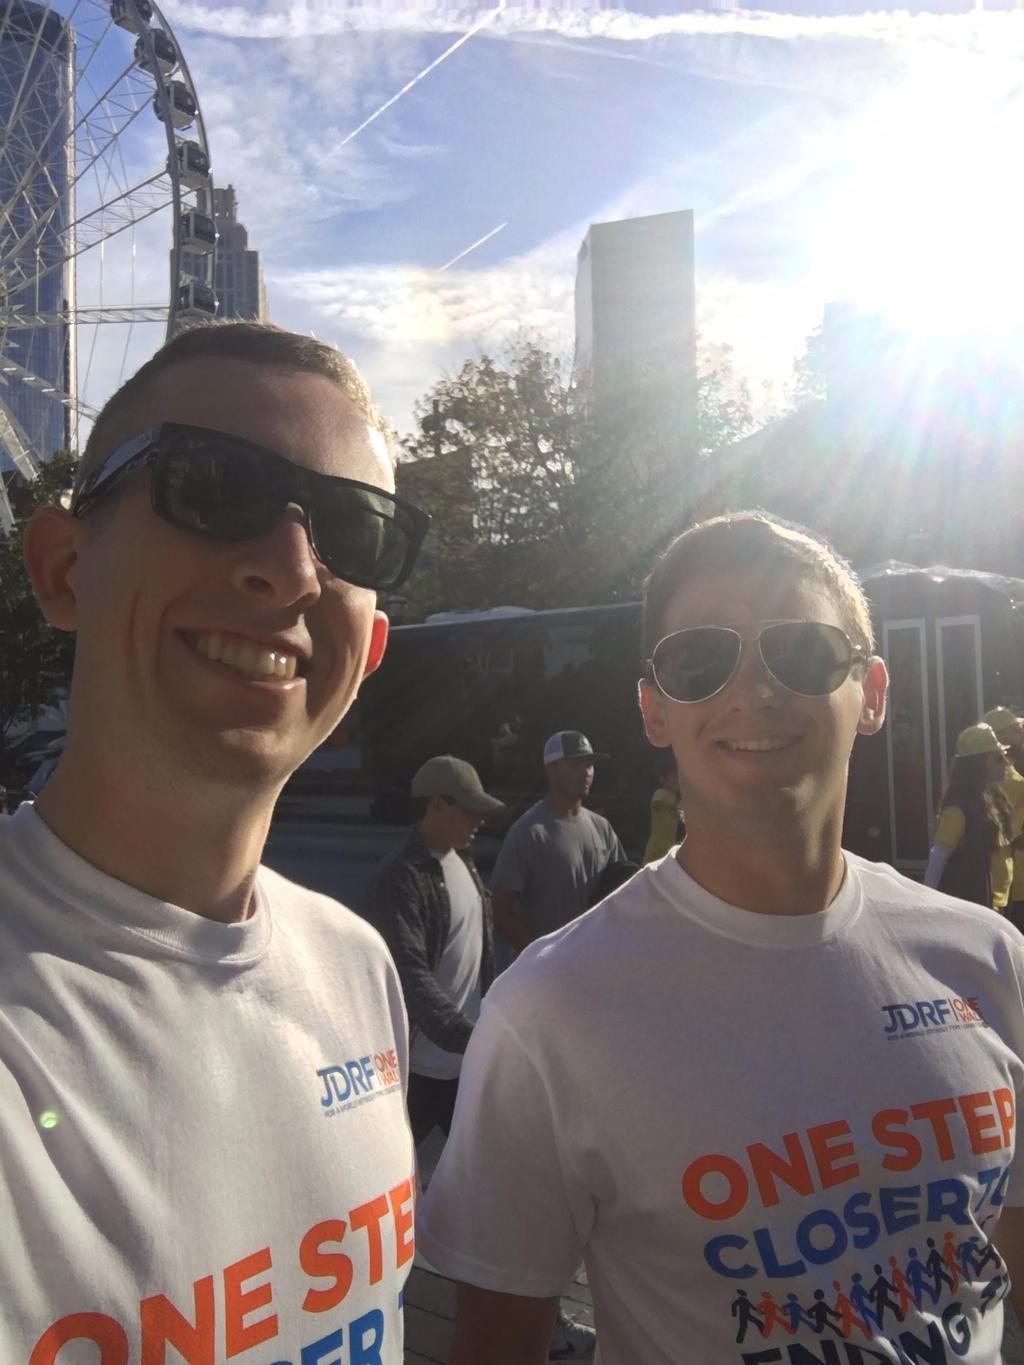 Raising Money for Diabetes Research Brother Colon Olson With the support of some brothers, I participated in the Juvenile Diabetes Research Foundation s One Walk on October 21.